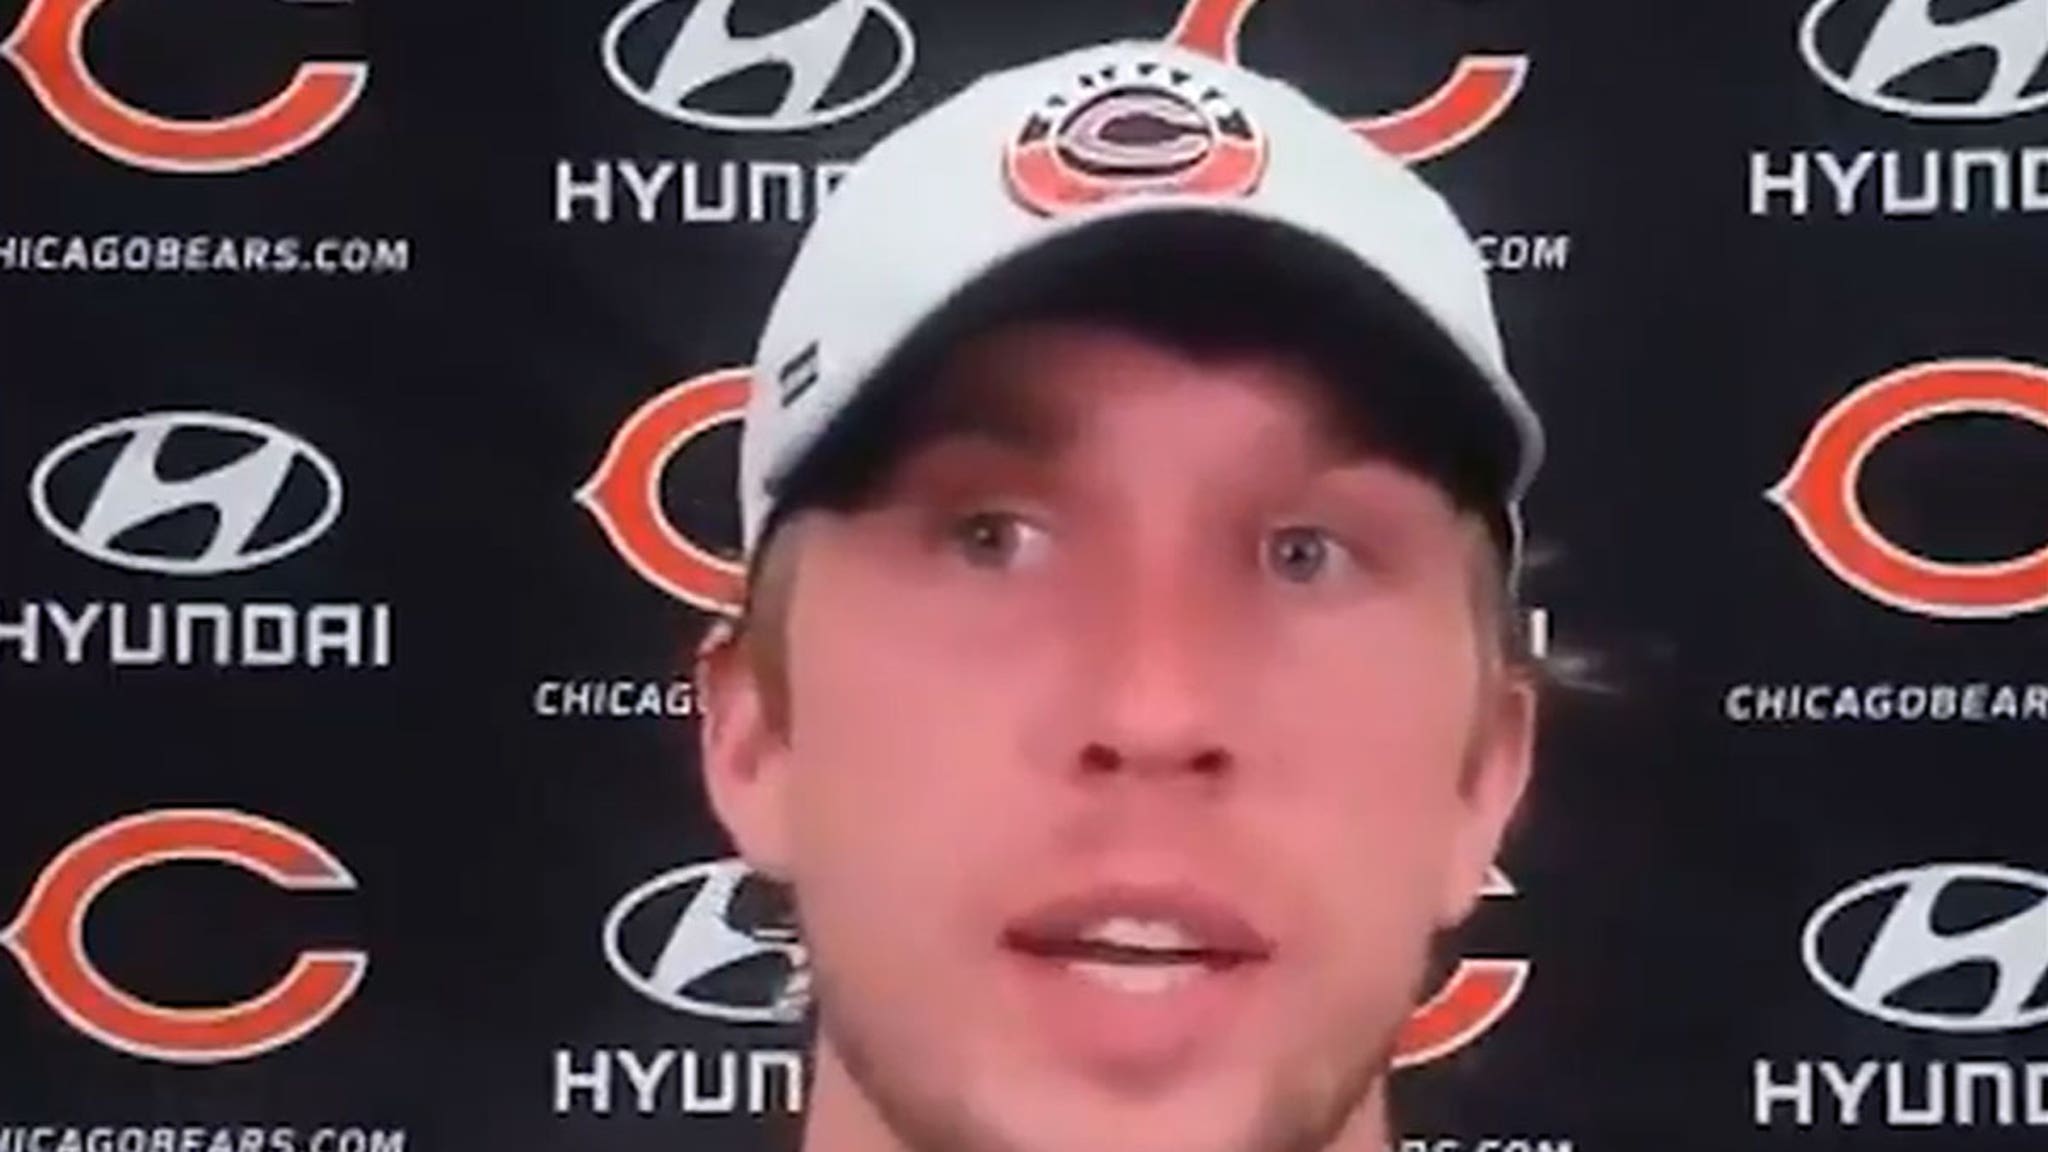 Nick Foles Shouts Out Meek Mill After Huge Bears Win, 'Got My Juices Going'